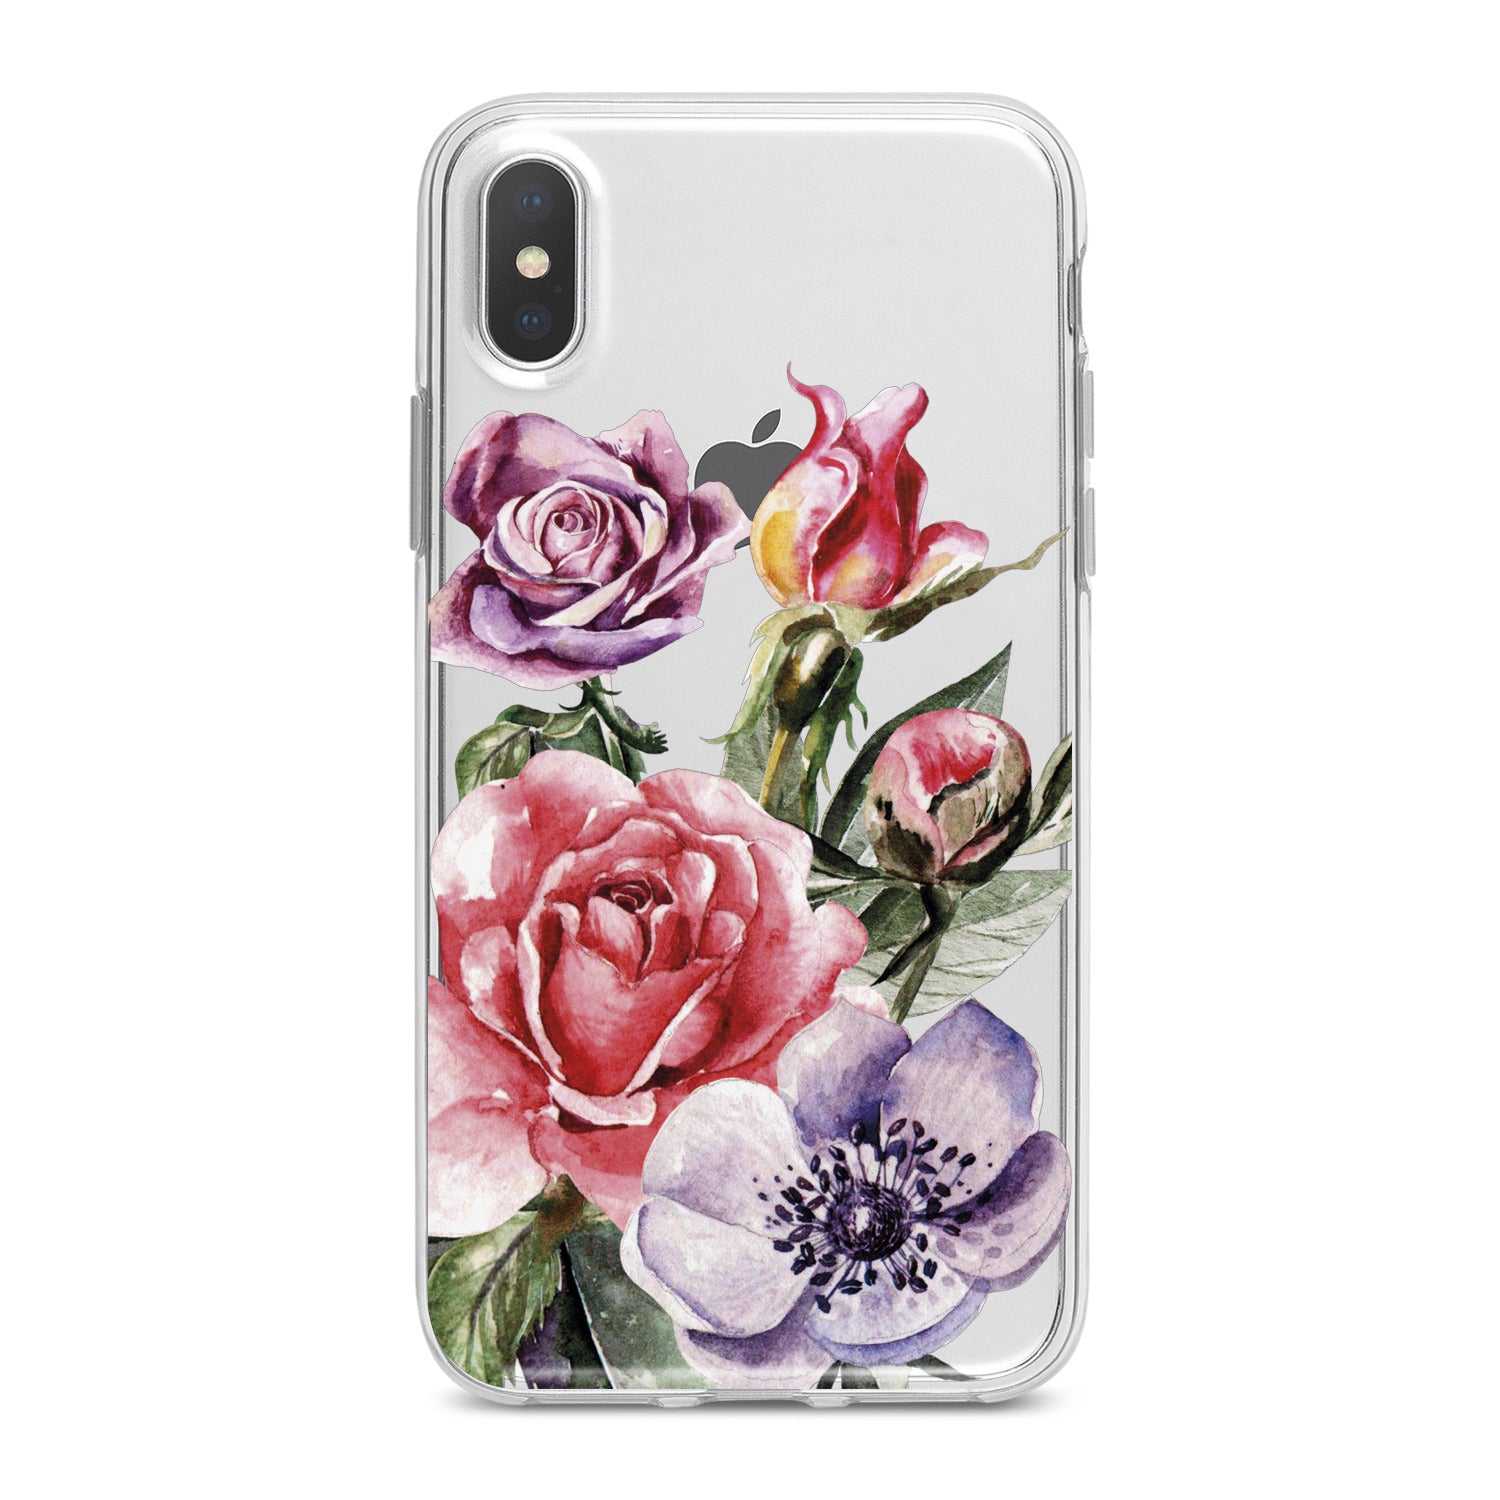 Lex Altern Roses Boquet Phone Case for your iPhone & Android phone.